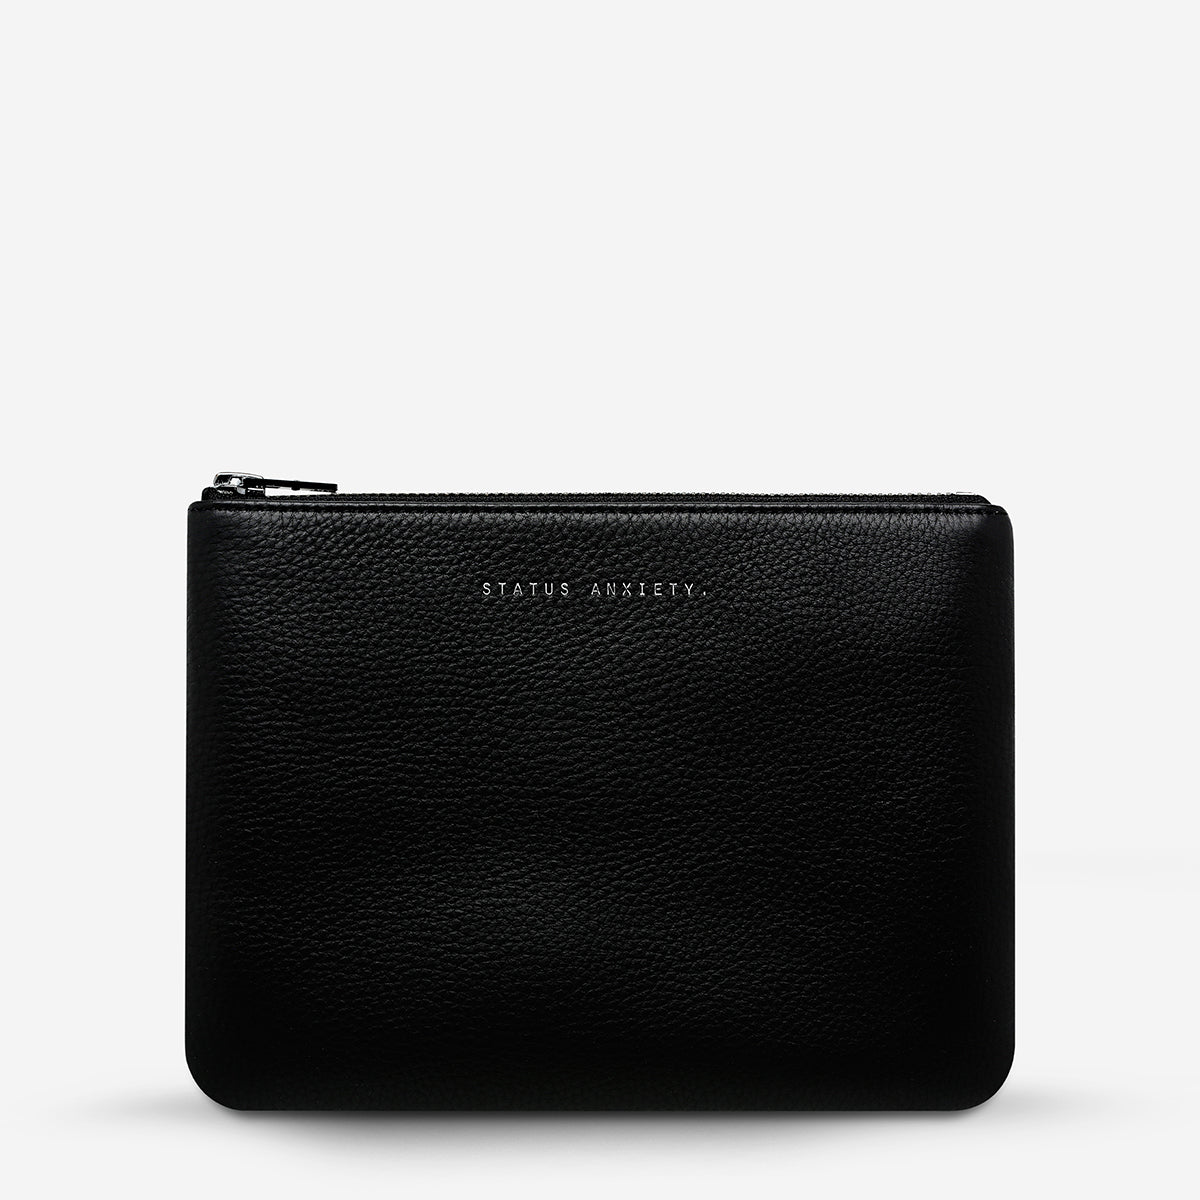 status-anxiety-wallet-new-day-black-front.jpg